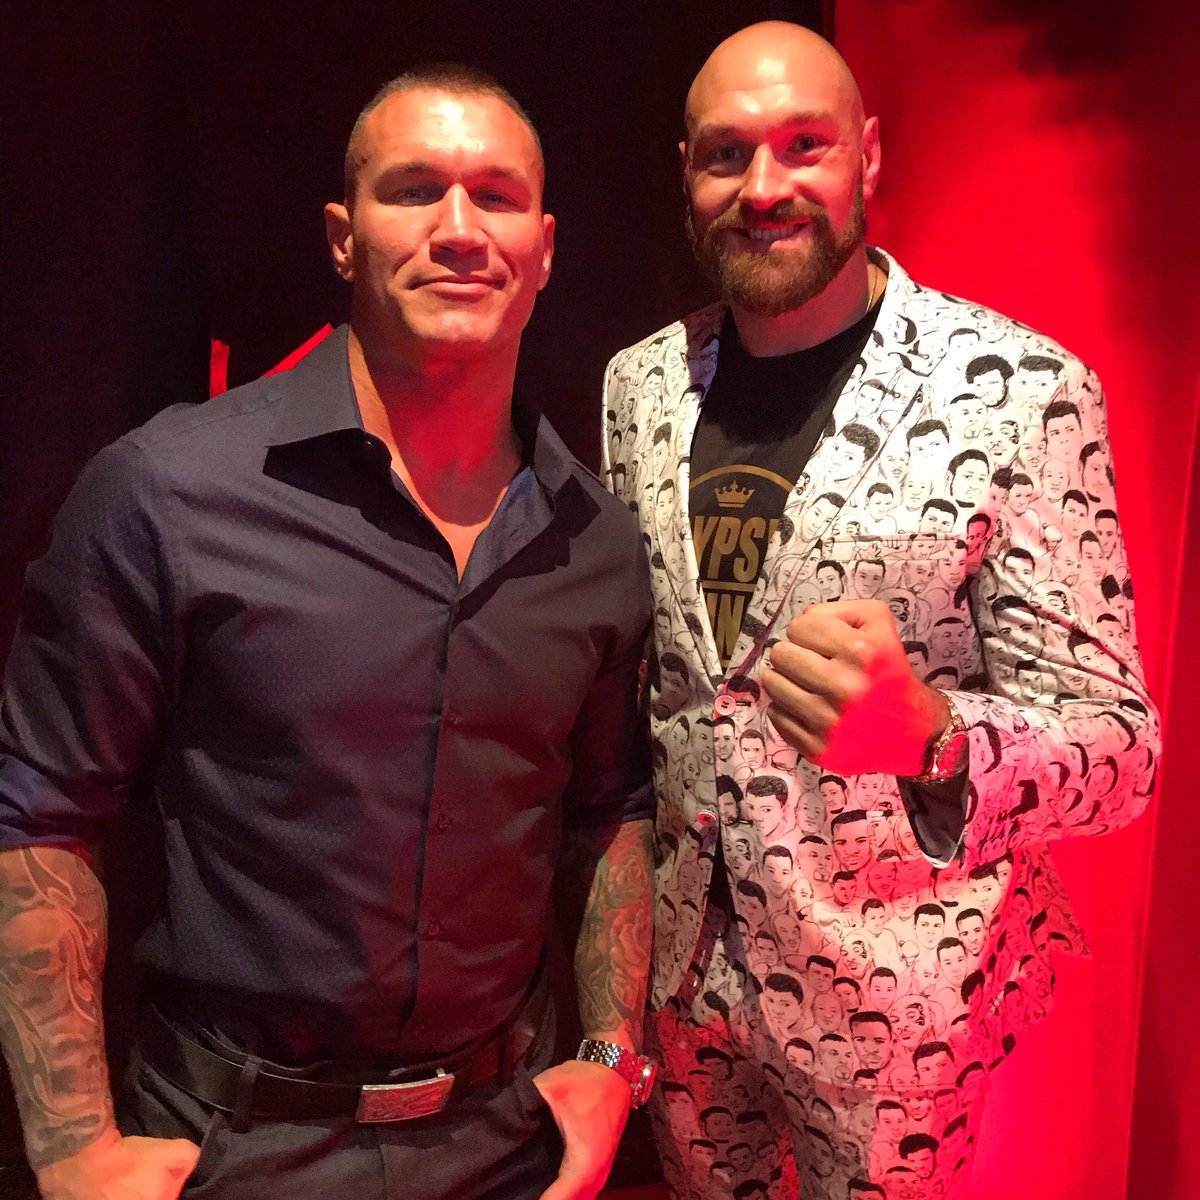 Looking forward to seeing @Tyson_Fury in action tomorrow as well as seeing how many #RKOs are in the #mainevent at #WWECrownJewel #TeamFlair @wwe